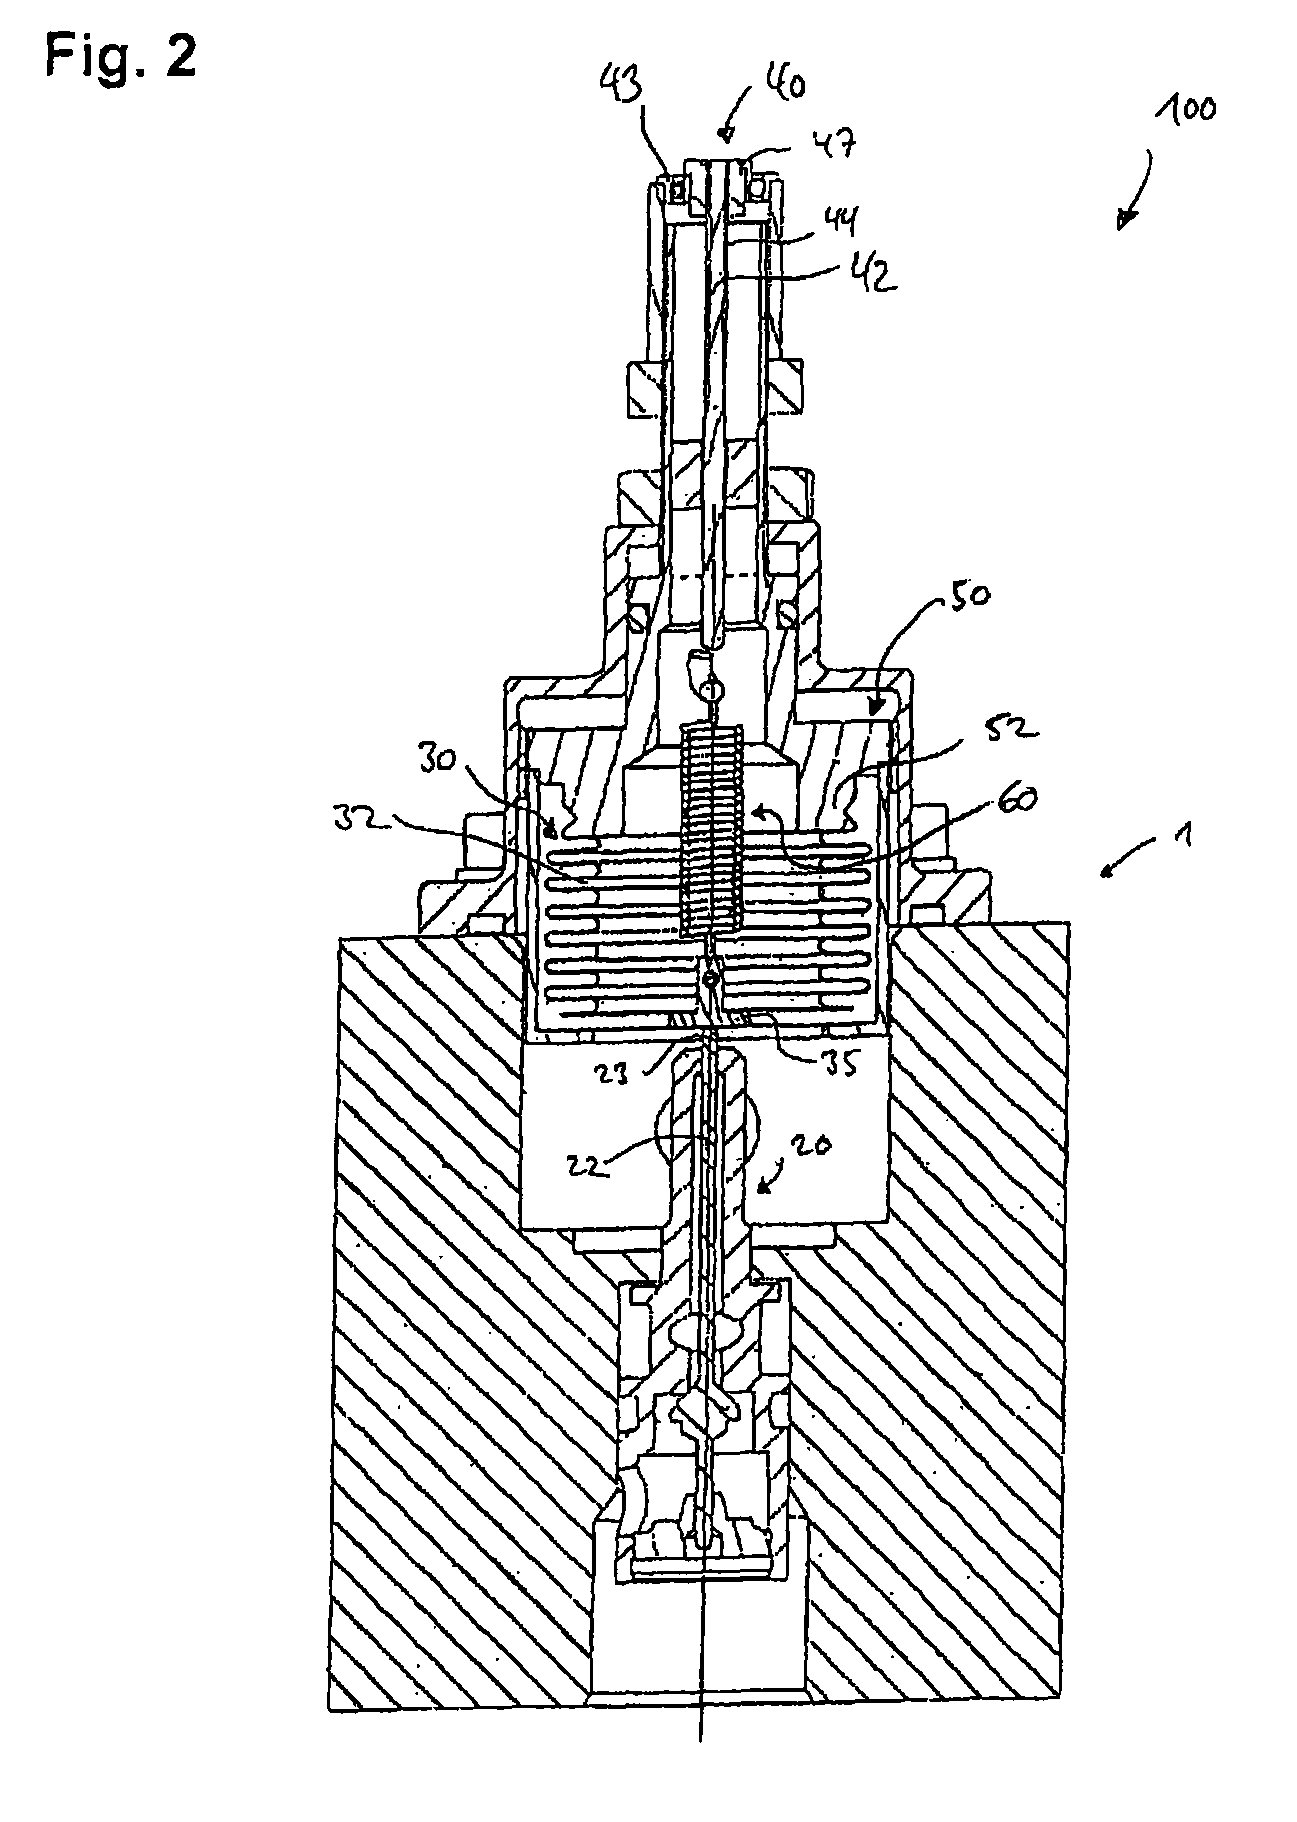 Control unit for actuating a pressure valve, in particular a differential pressure valve of an aircraft cabin